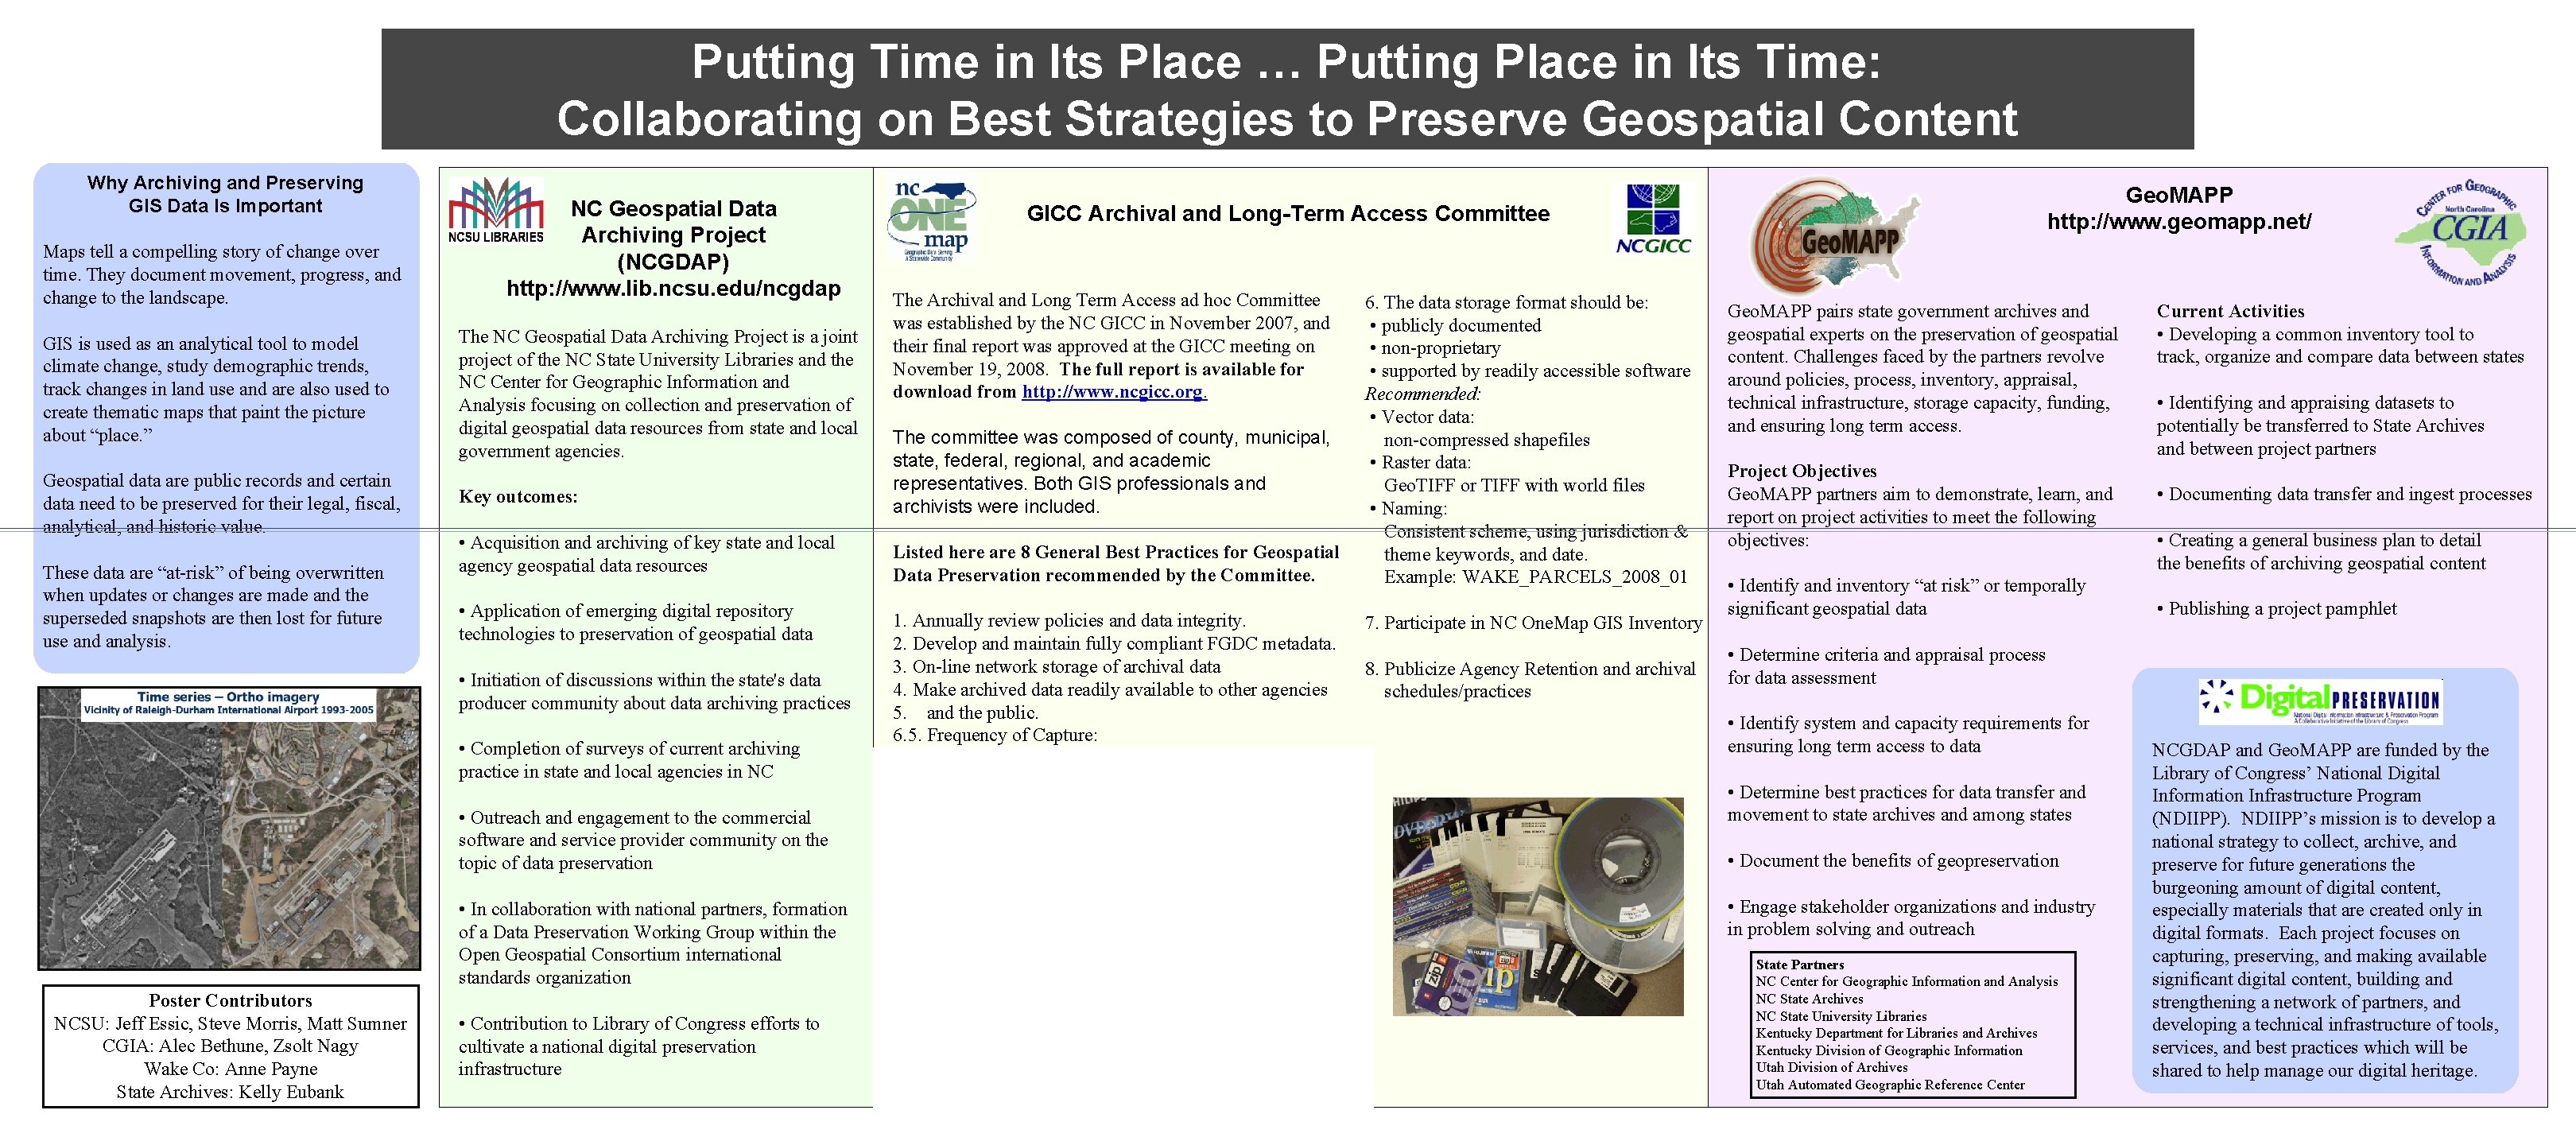 Putting Time in Its Place … Putting Place in Its Time: Collaborating on Best